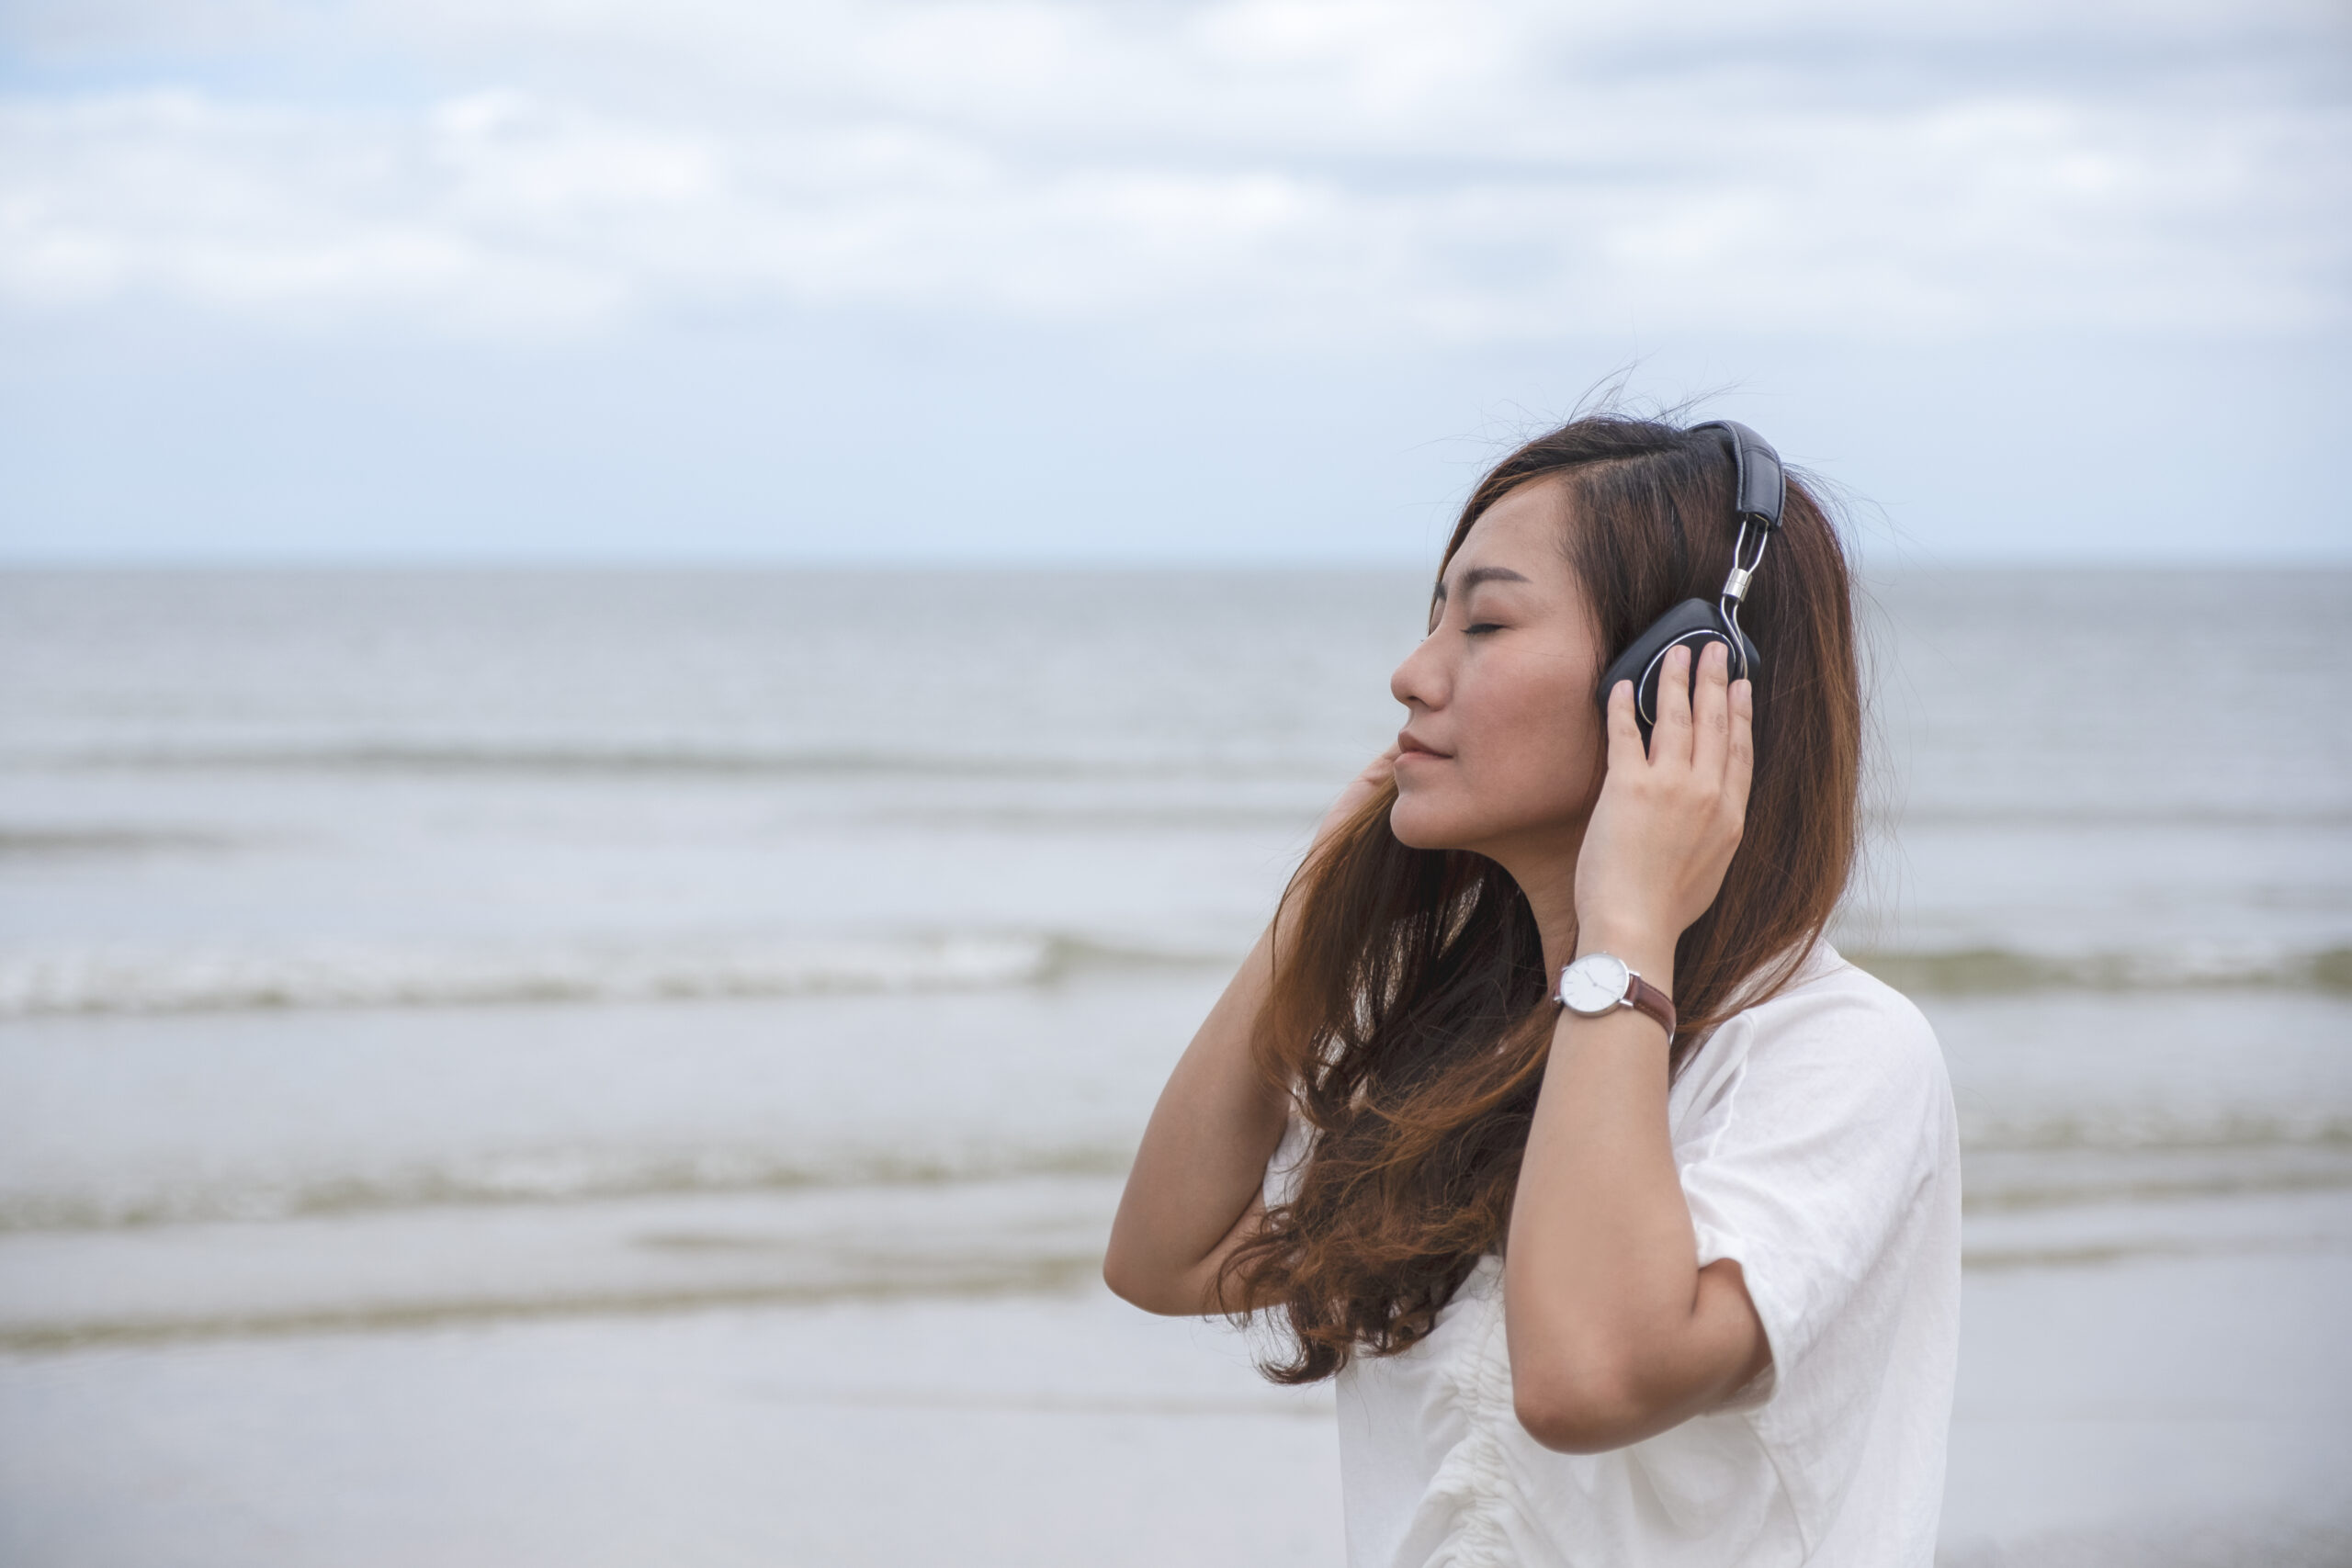 A sad woman listening to music with headphone by the sea